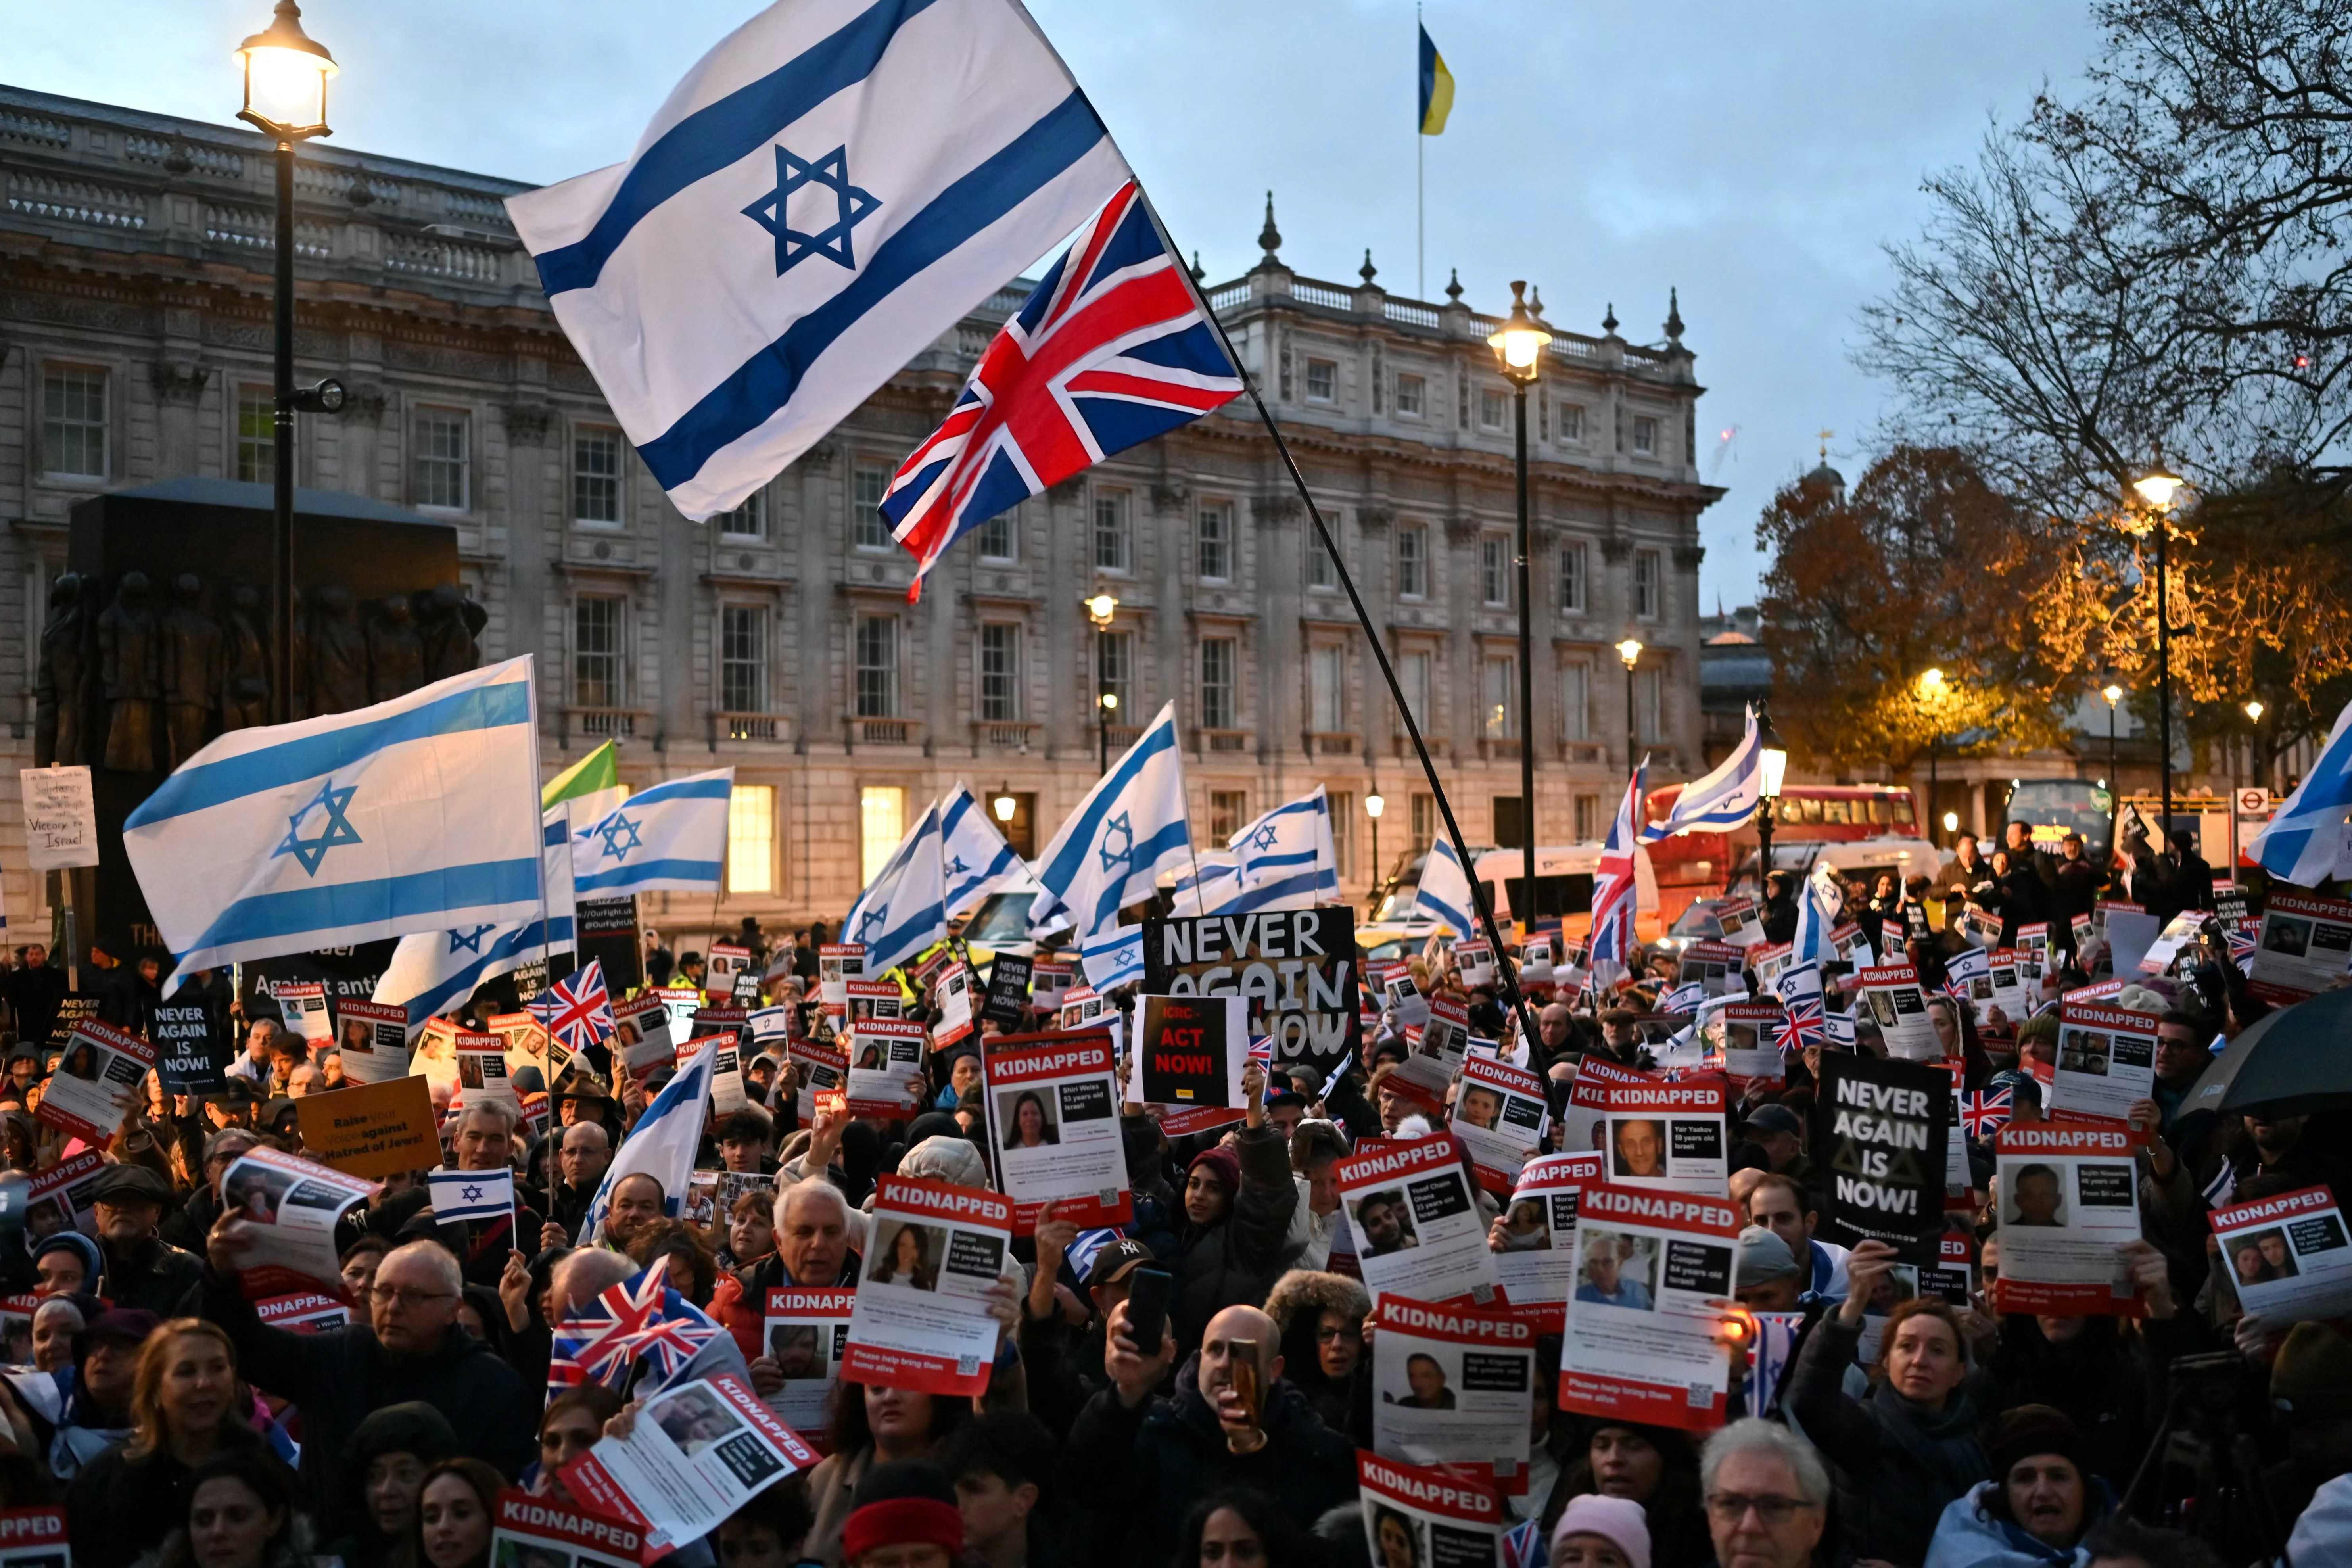 Thousands are expected to march as part of an anti-semitism protest on Sunday